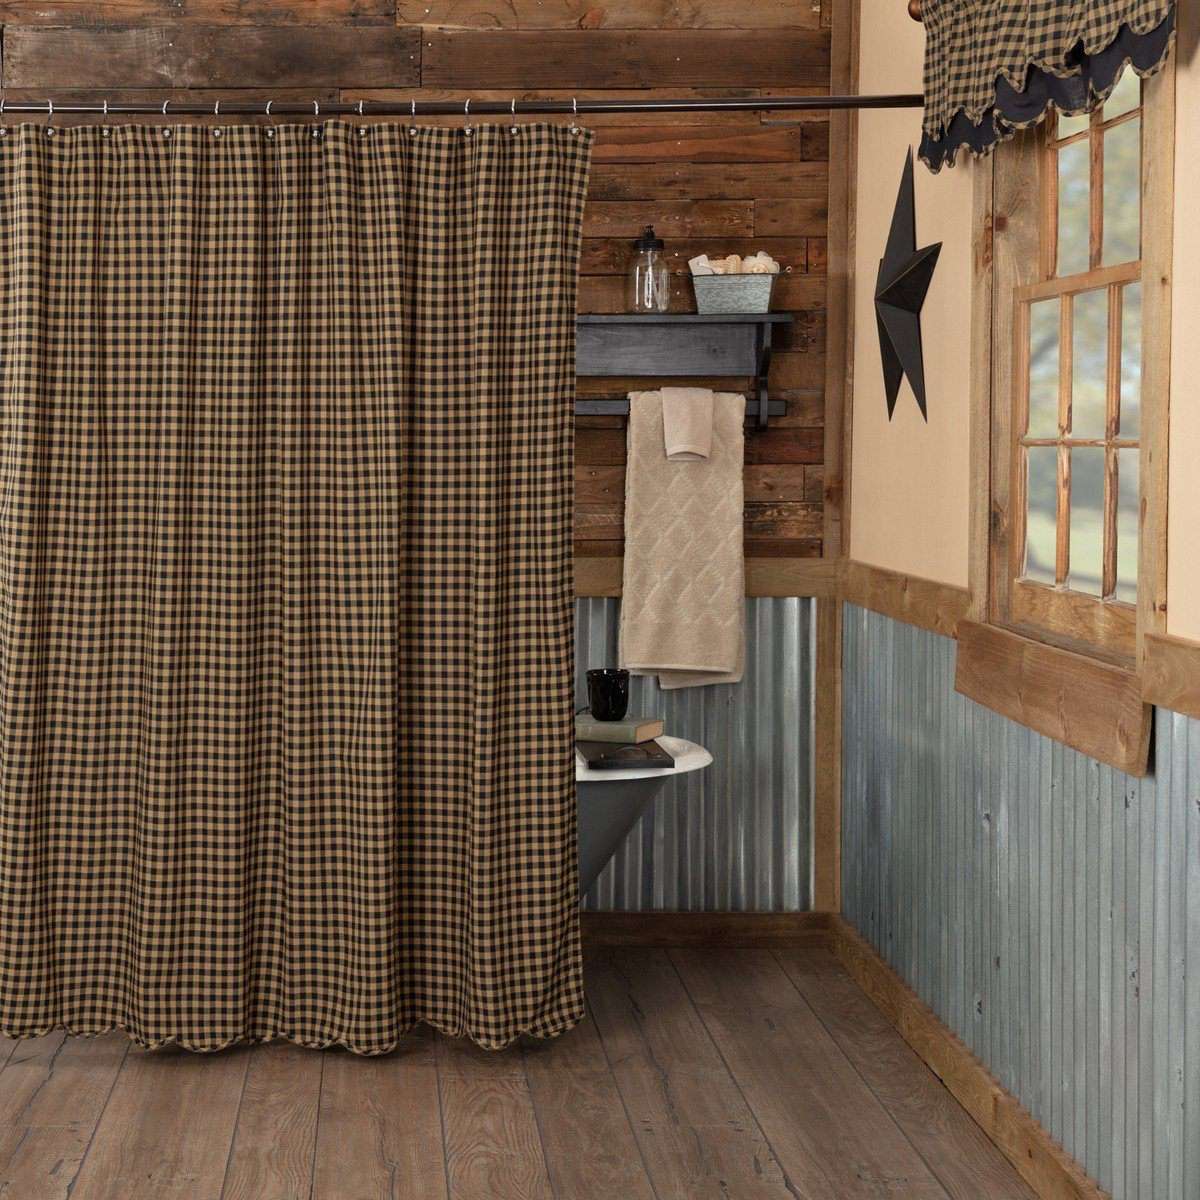 Black Check Scalloped Shower Curtain 72"x72" curtain VHC Brands 